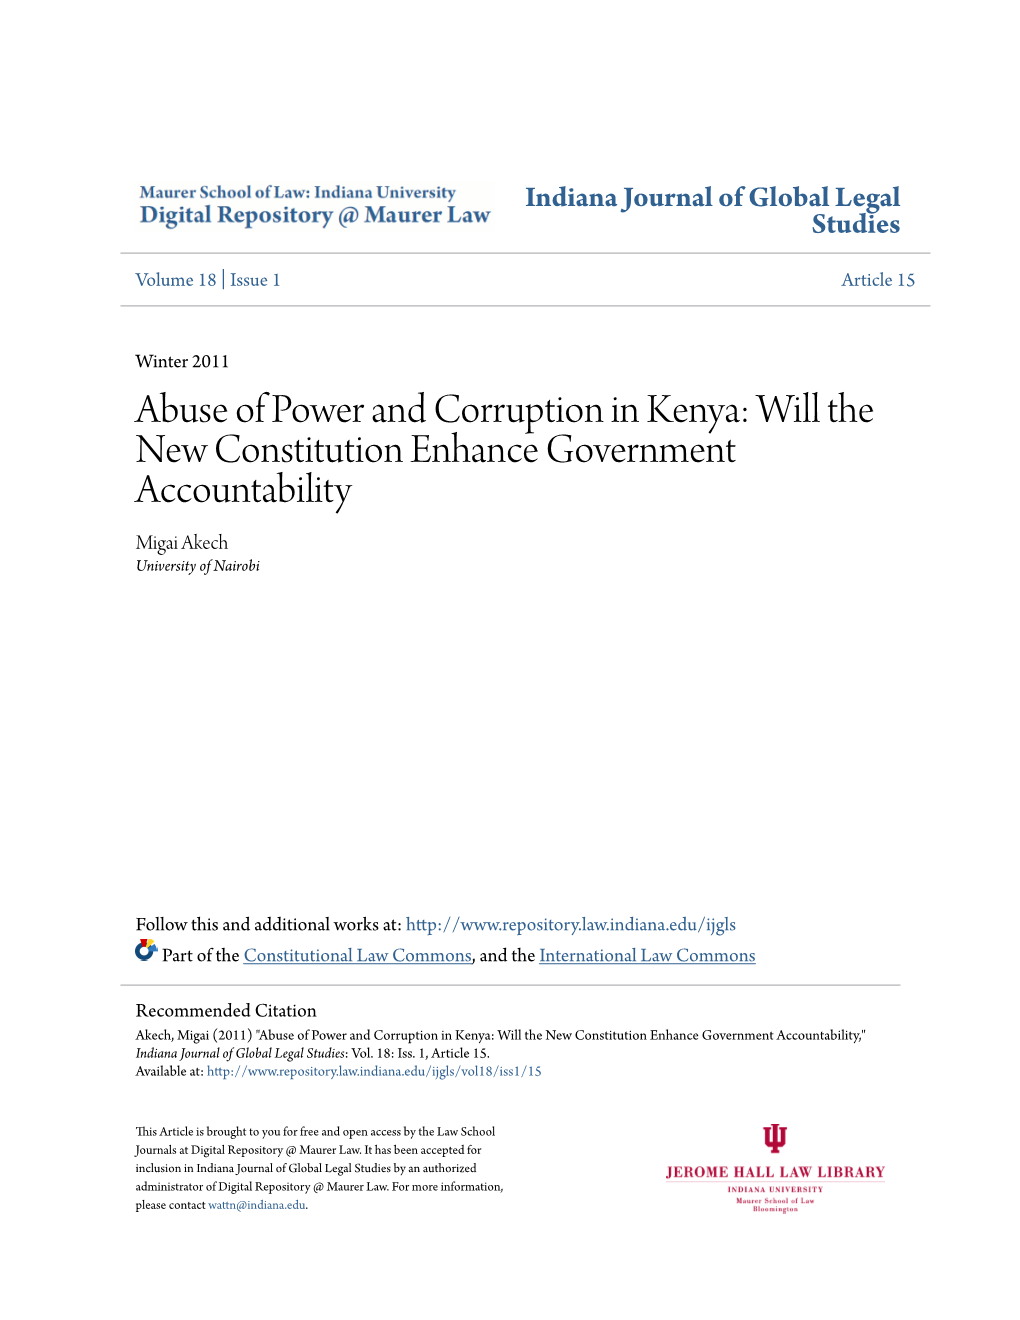 Abuse of Power and Corruption in Kenya: Will the New Constitution Enhance Government Accountability Migai Akech University of Nairobi